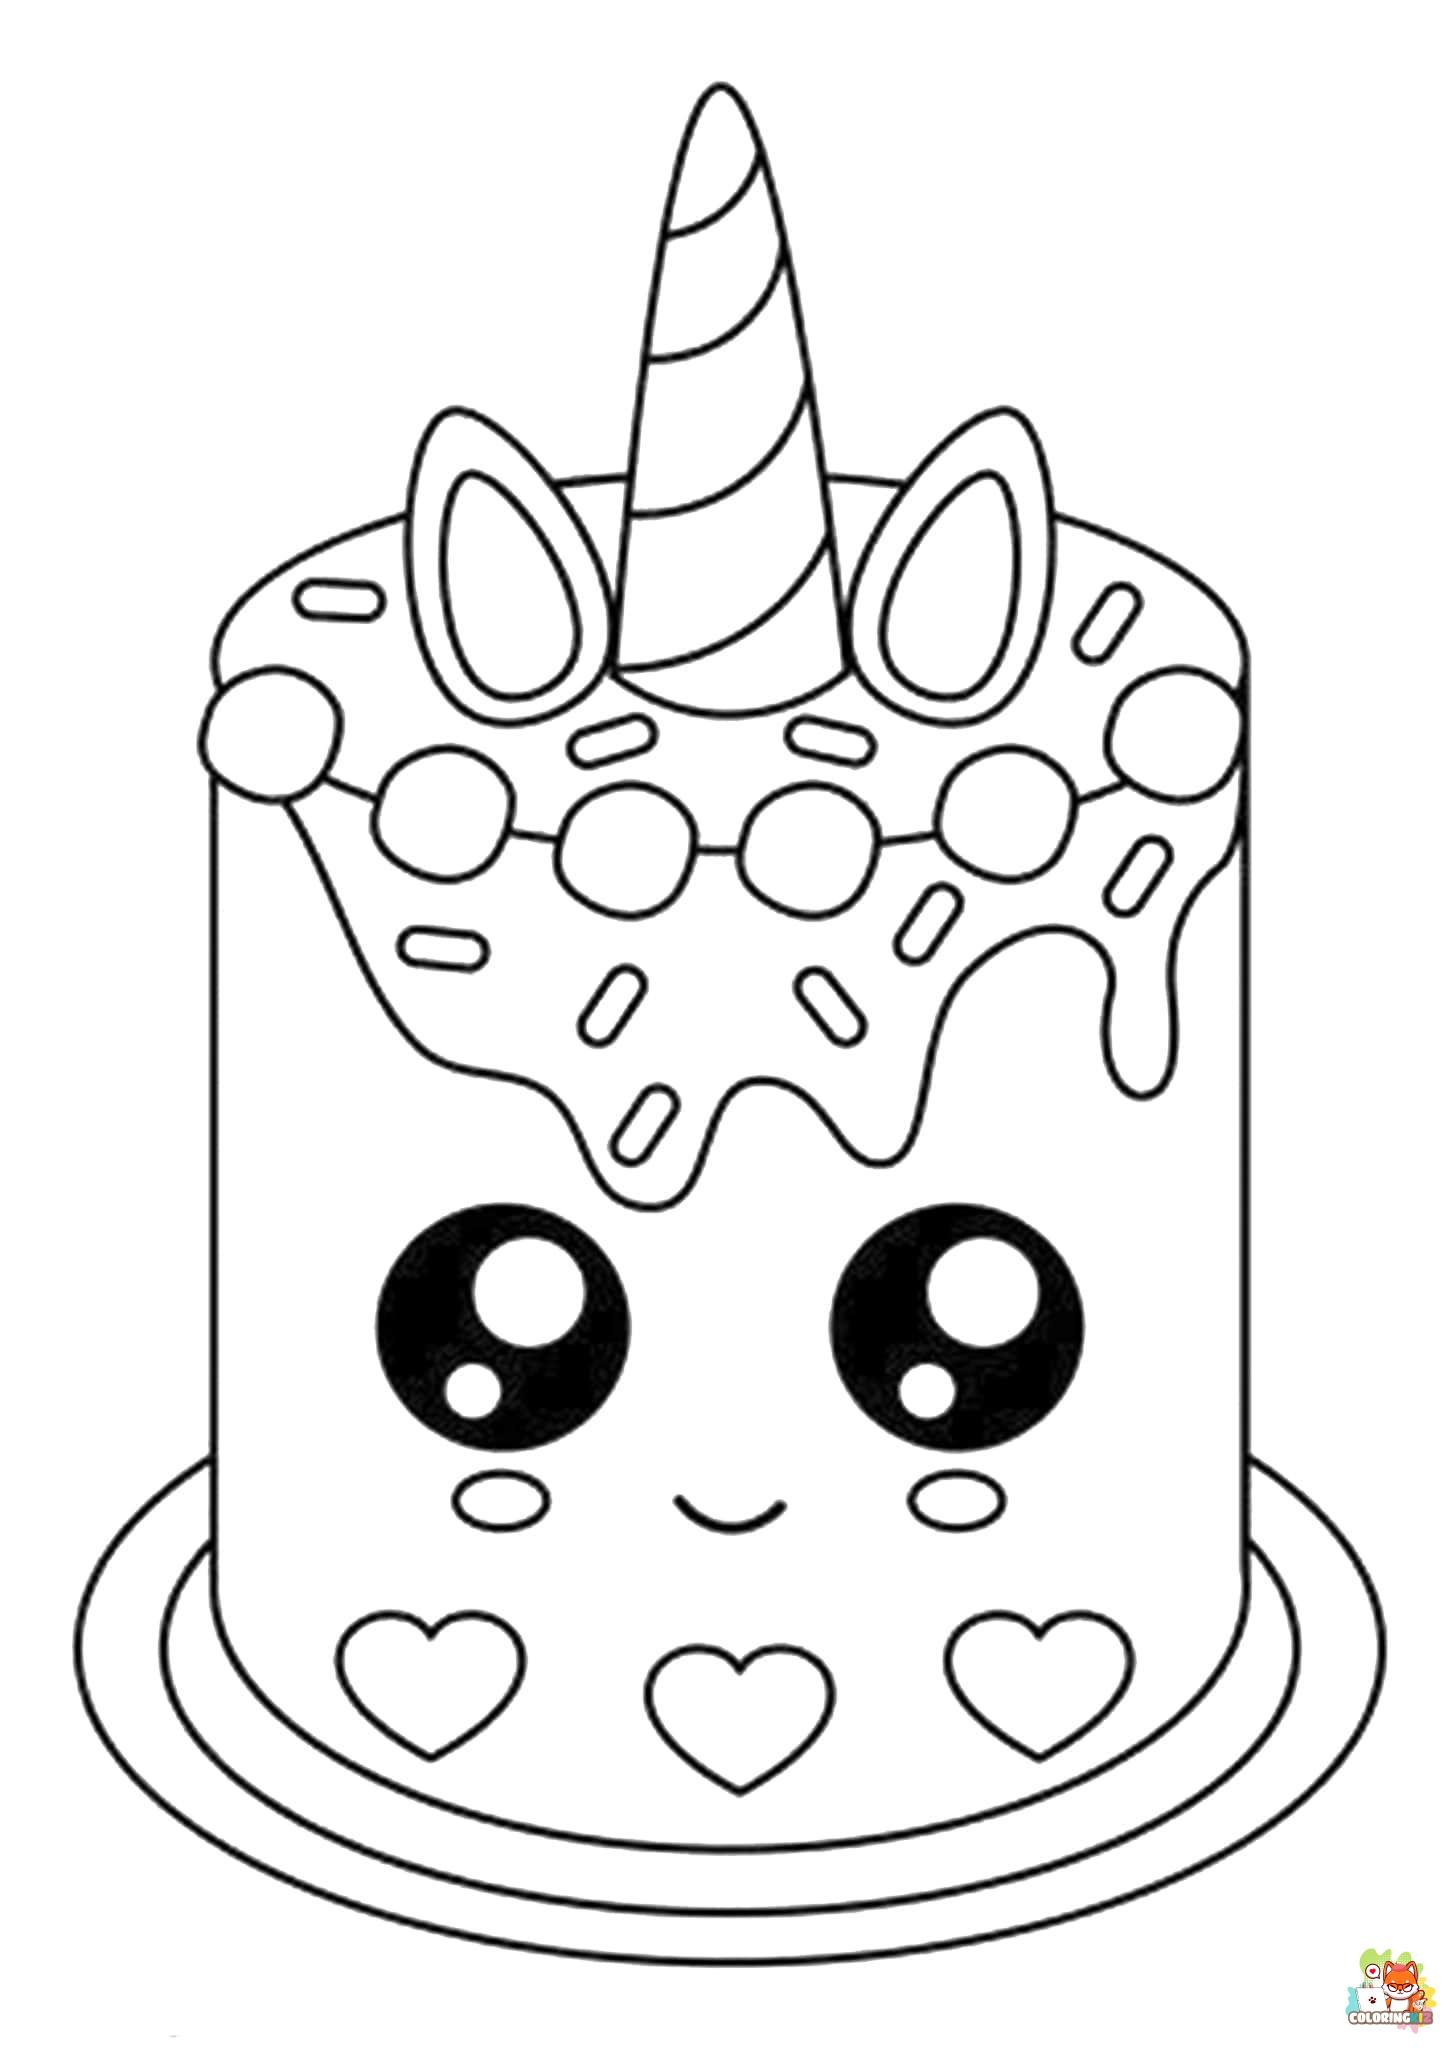 Unicorn Cake Coloring Pages 2